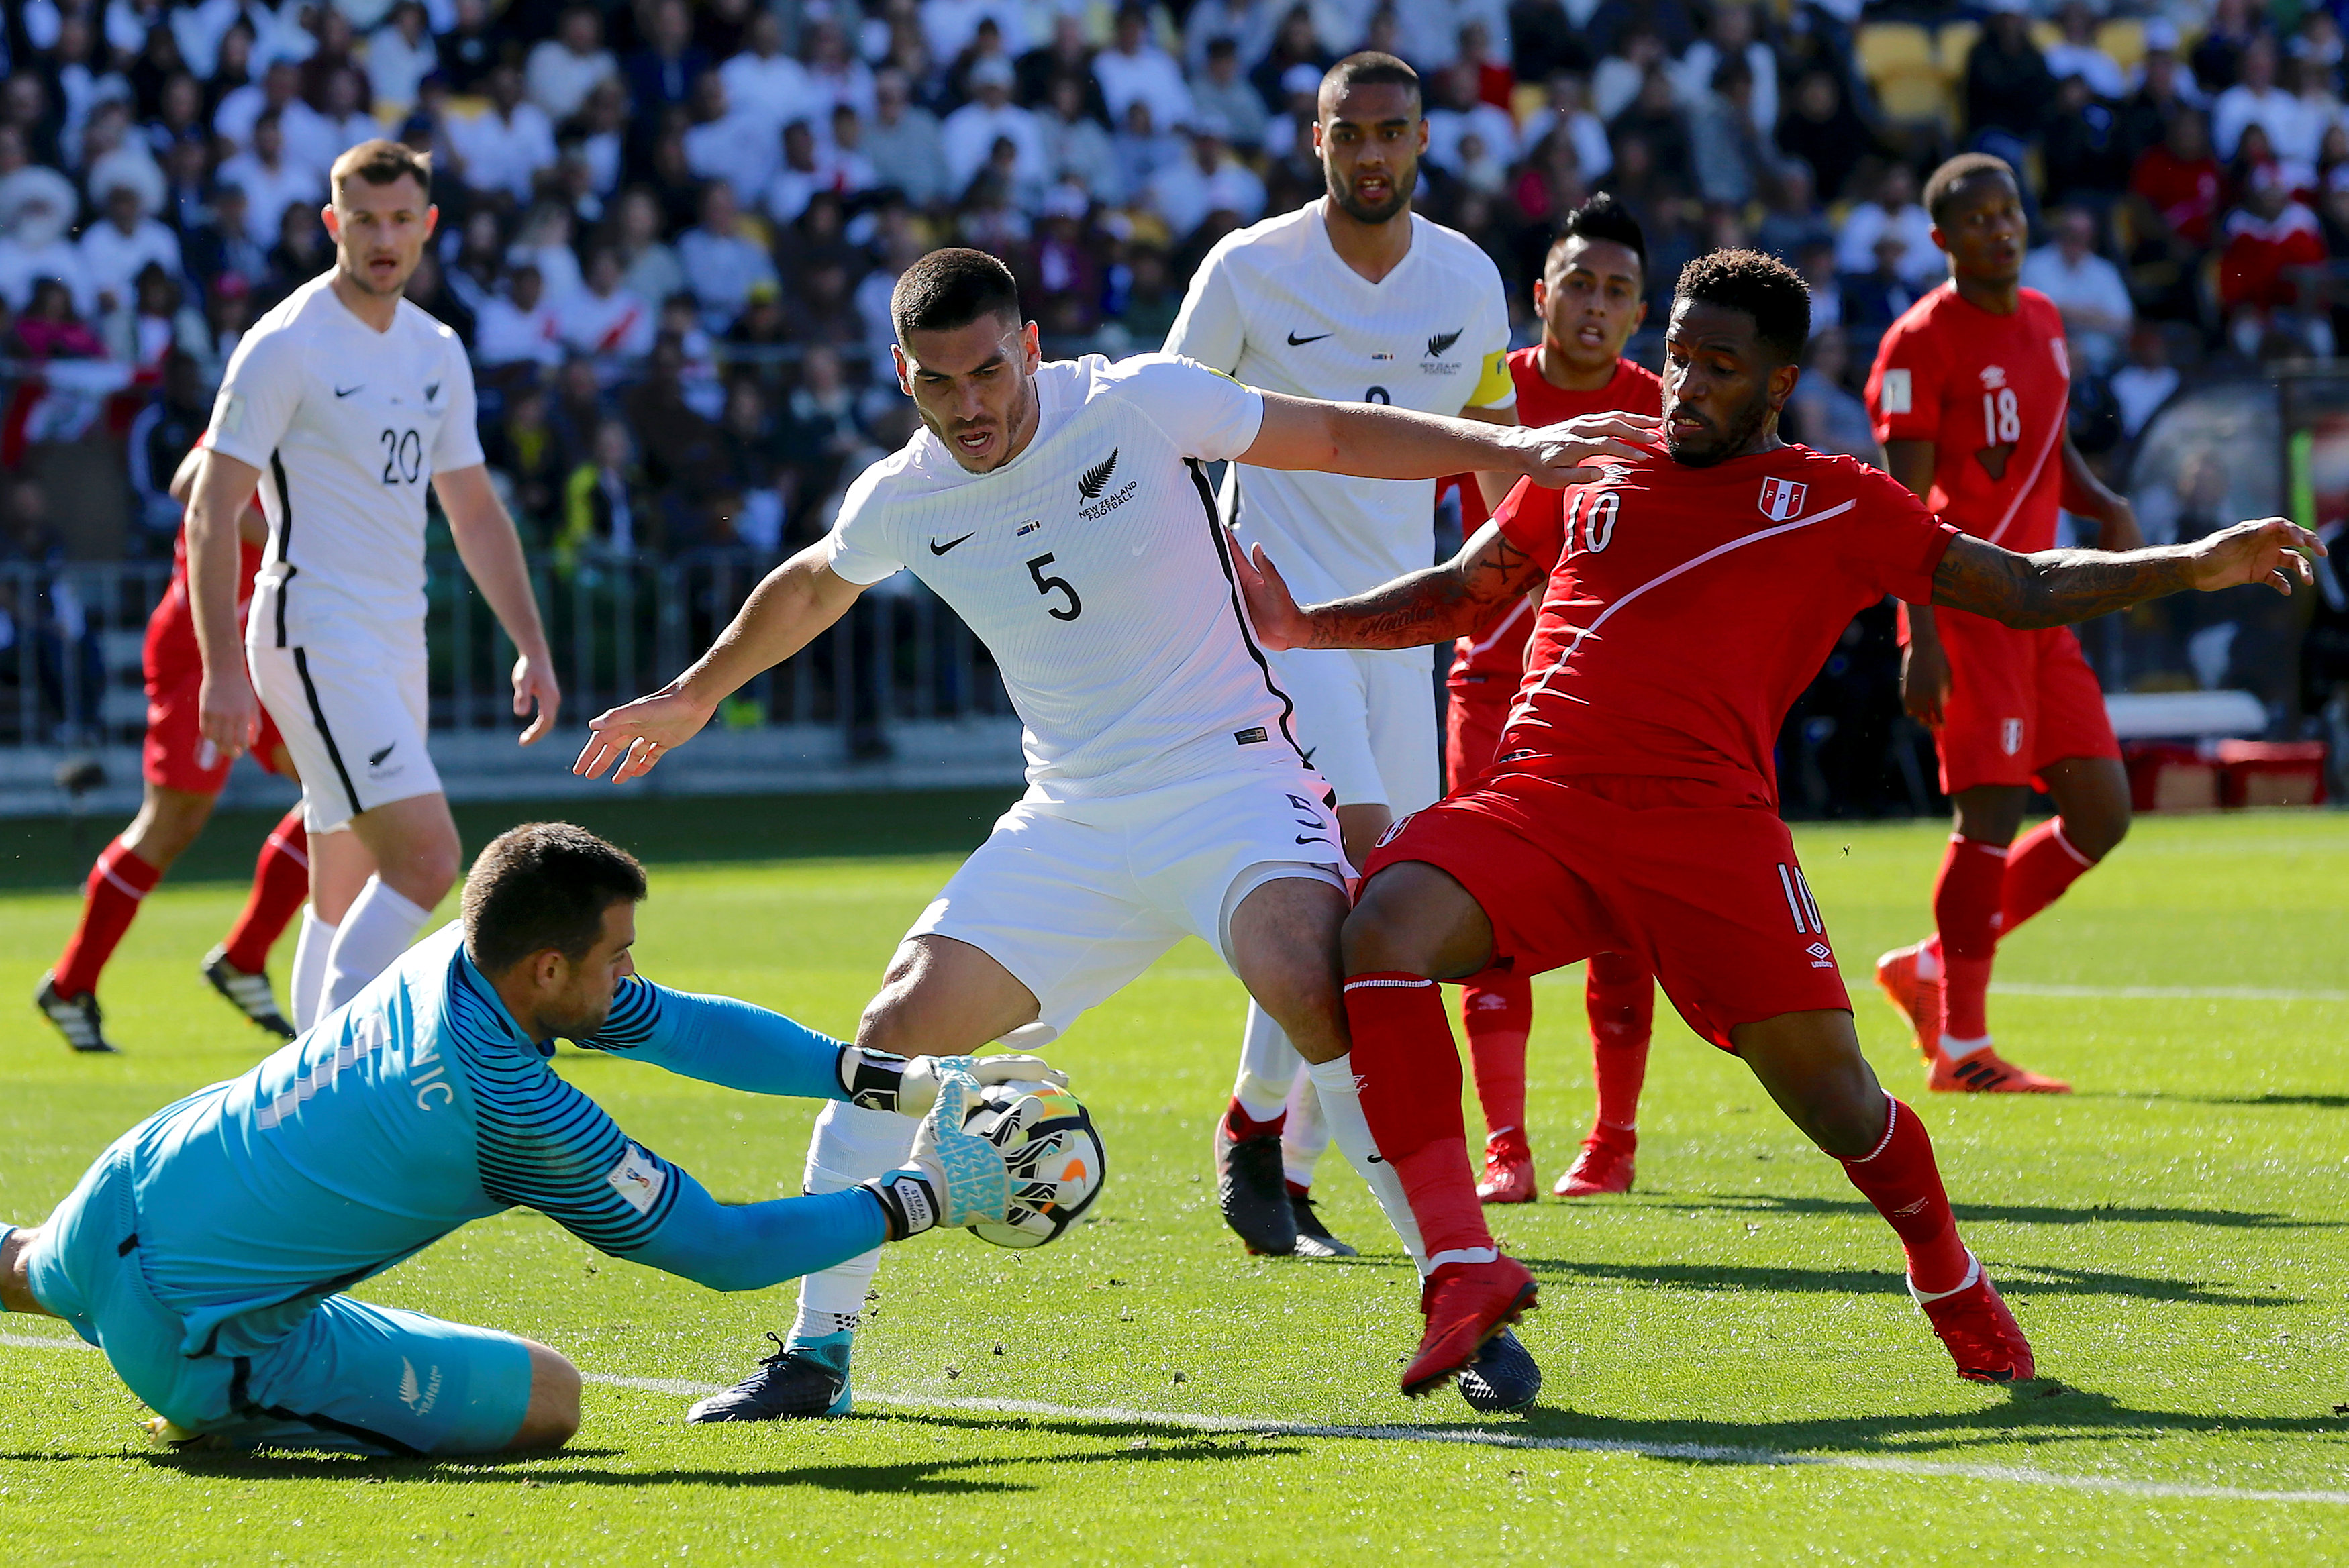 Football: New Zealand and Peru battle to goalless draw in World Cup playoff